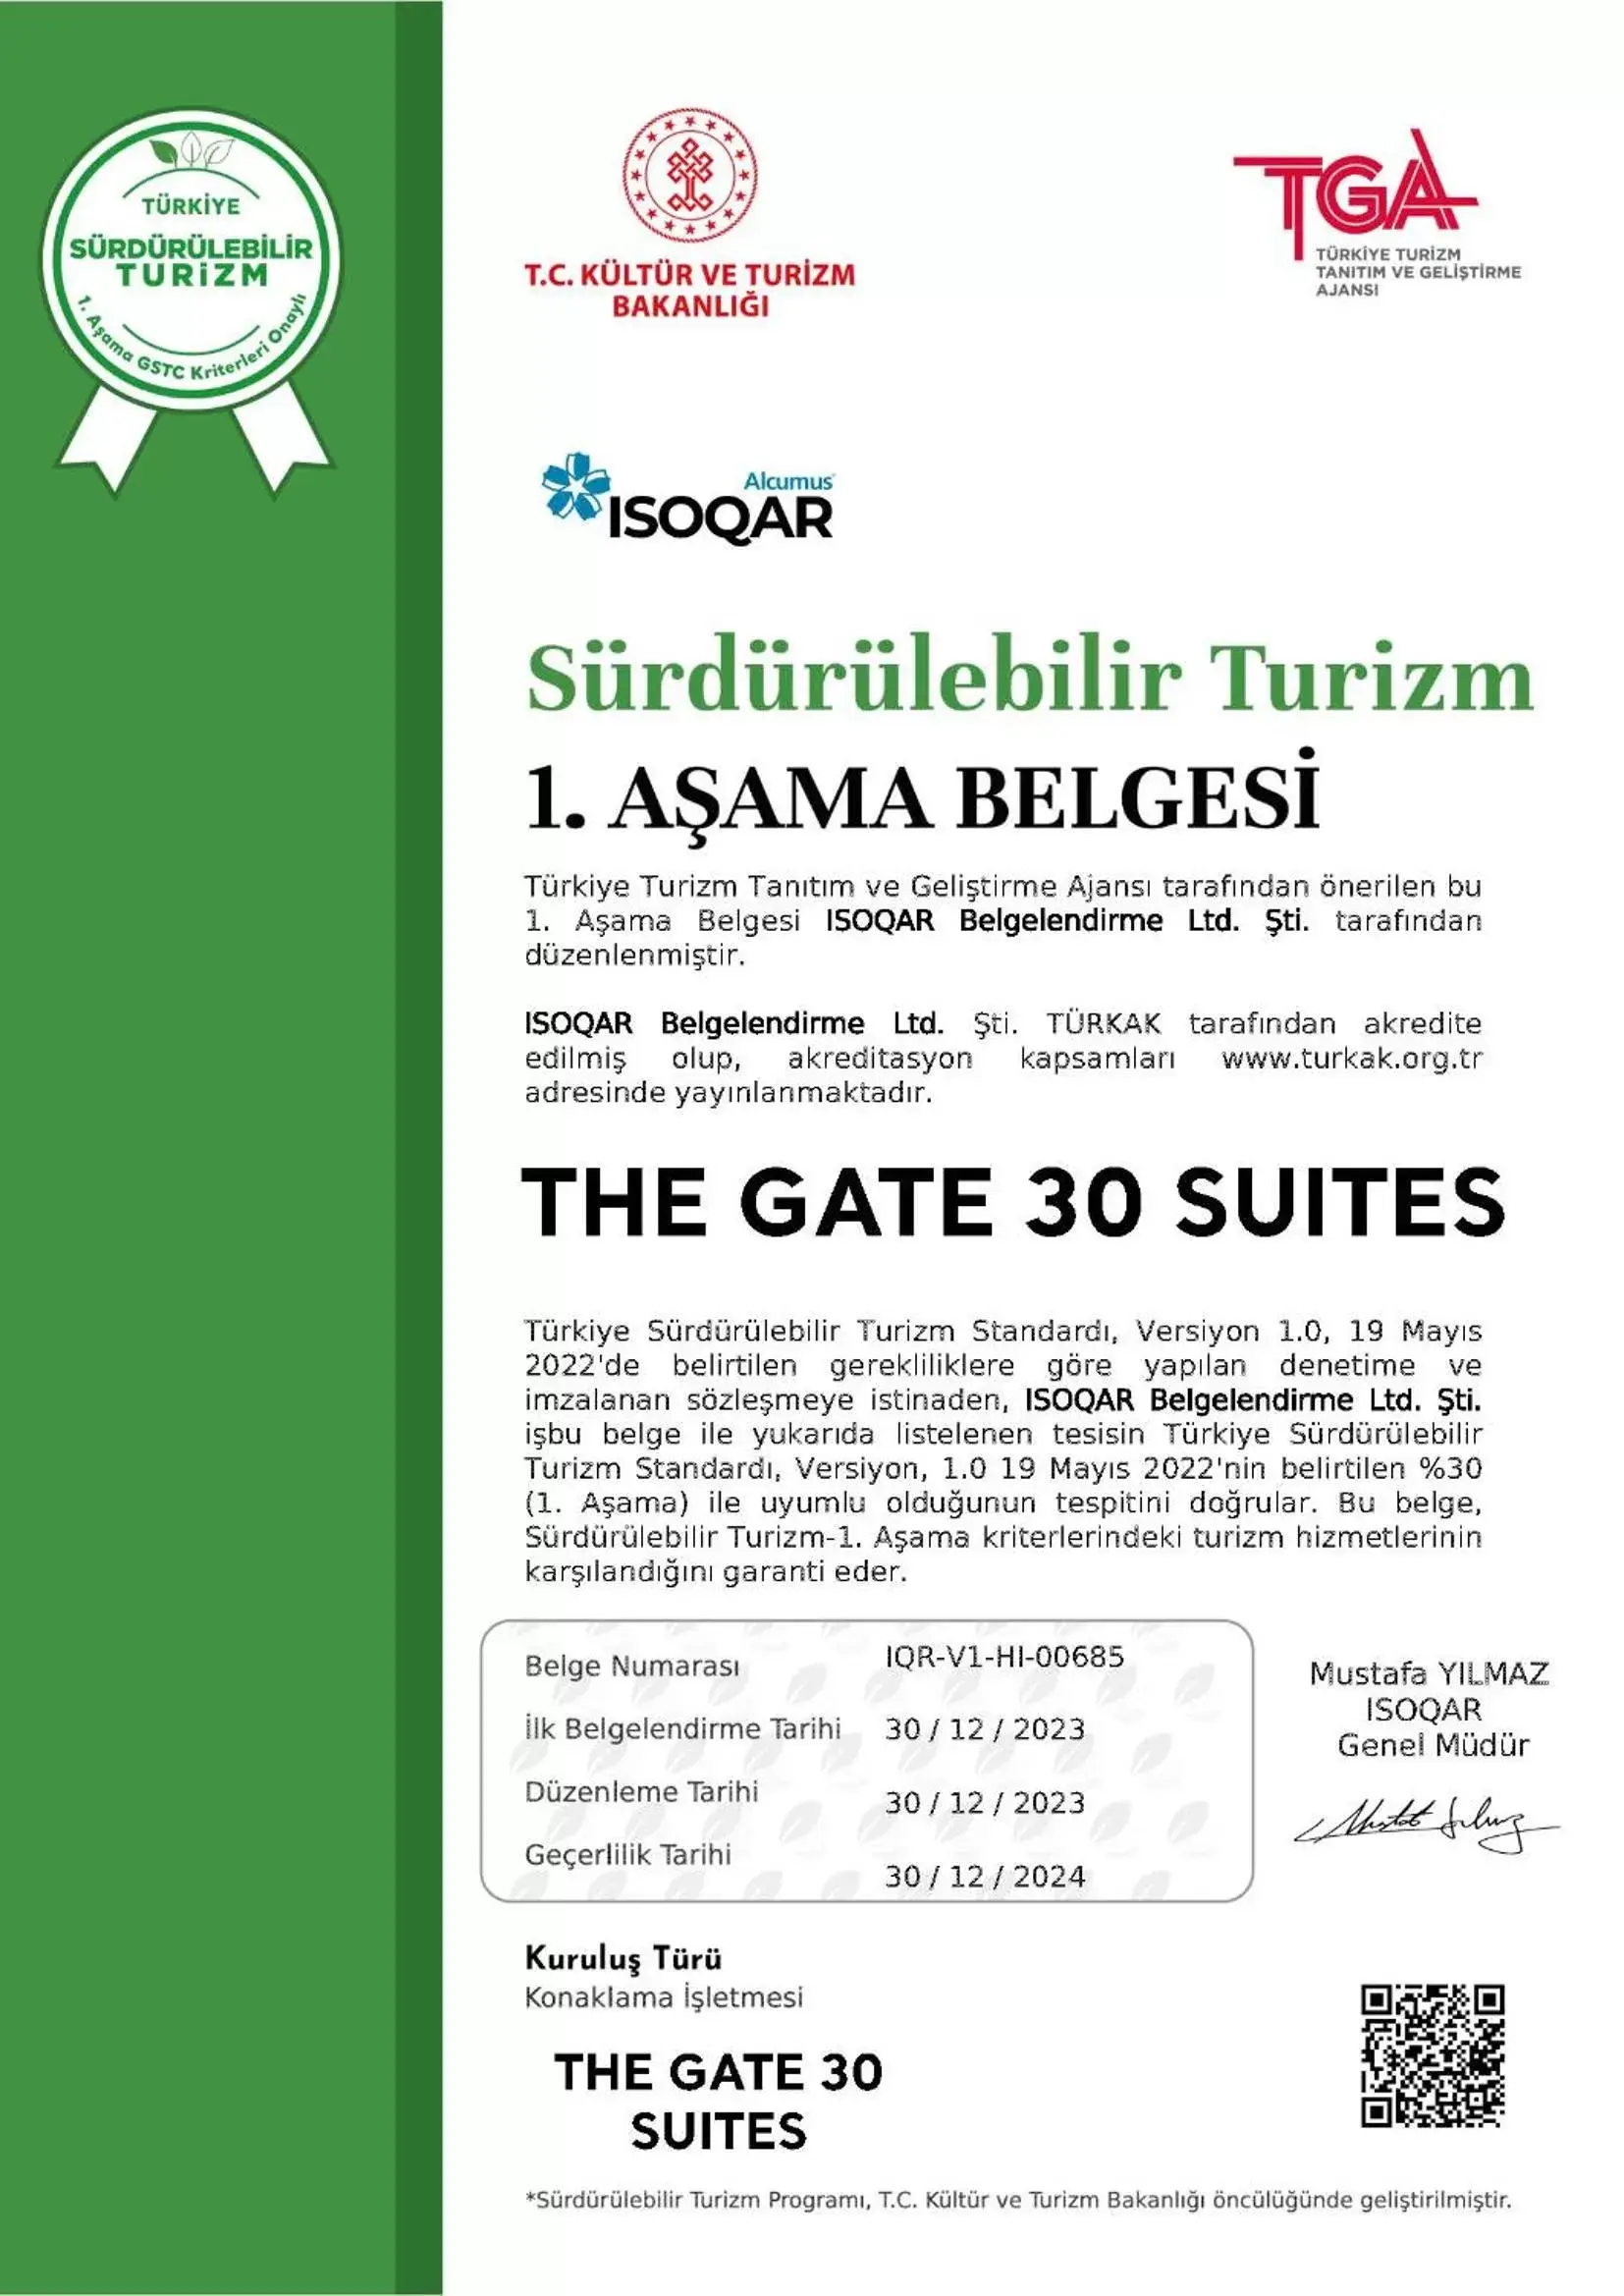 On site, Logo/Certificate/Sign/Award in The Gate 30 Suites Ataşehir